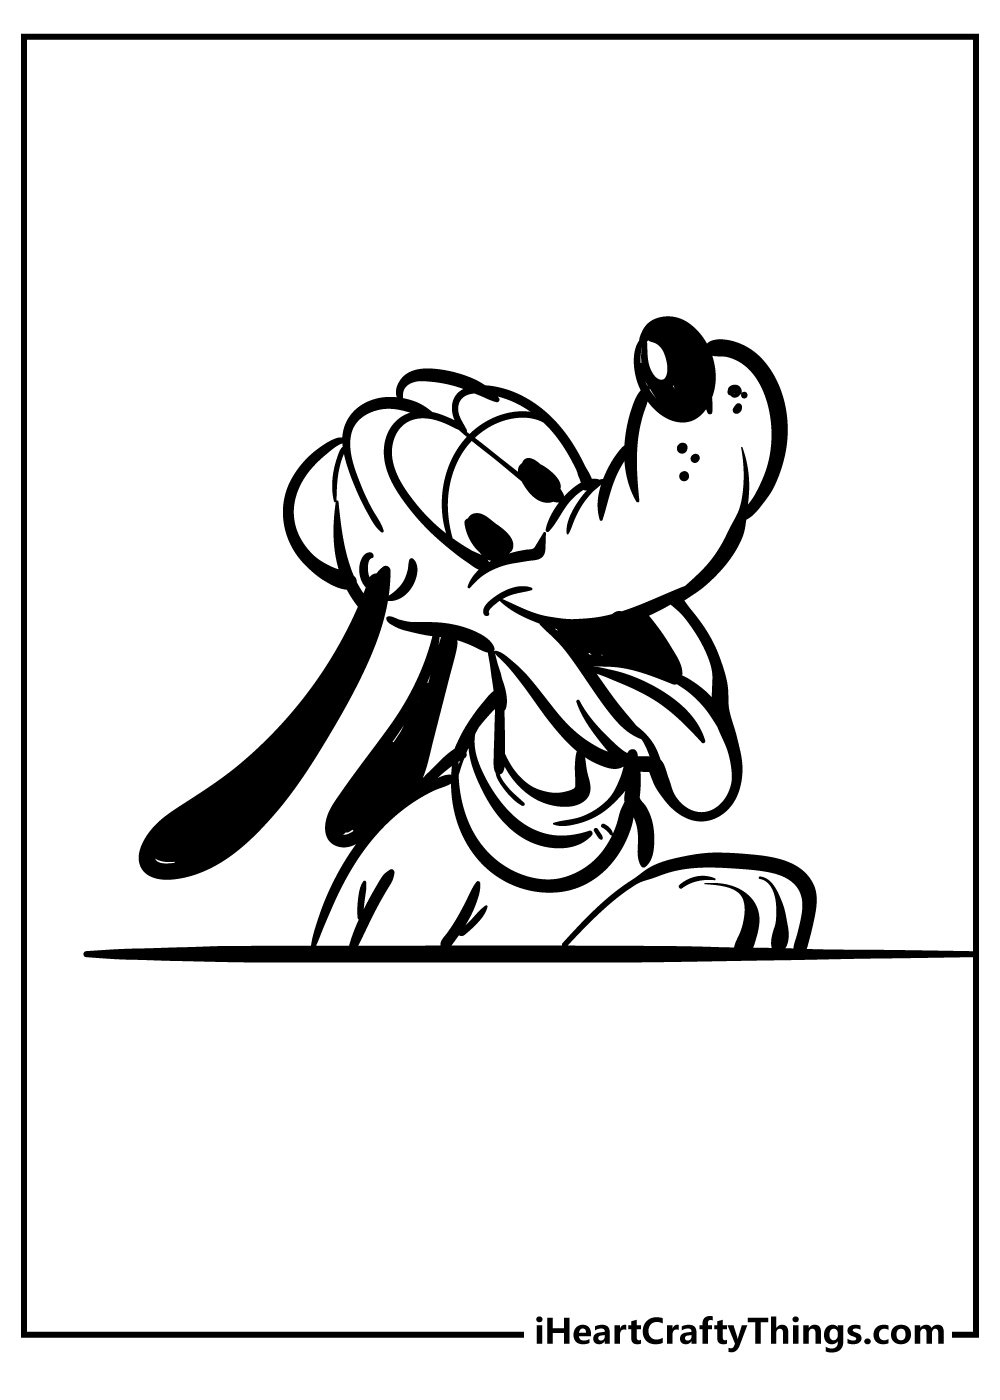 Pluto coloring pages free printables